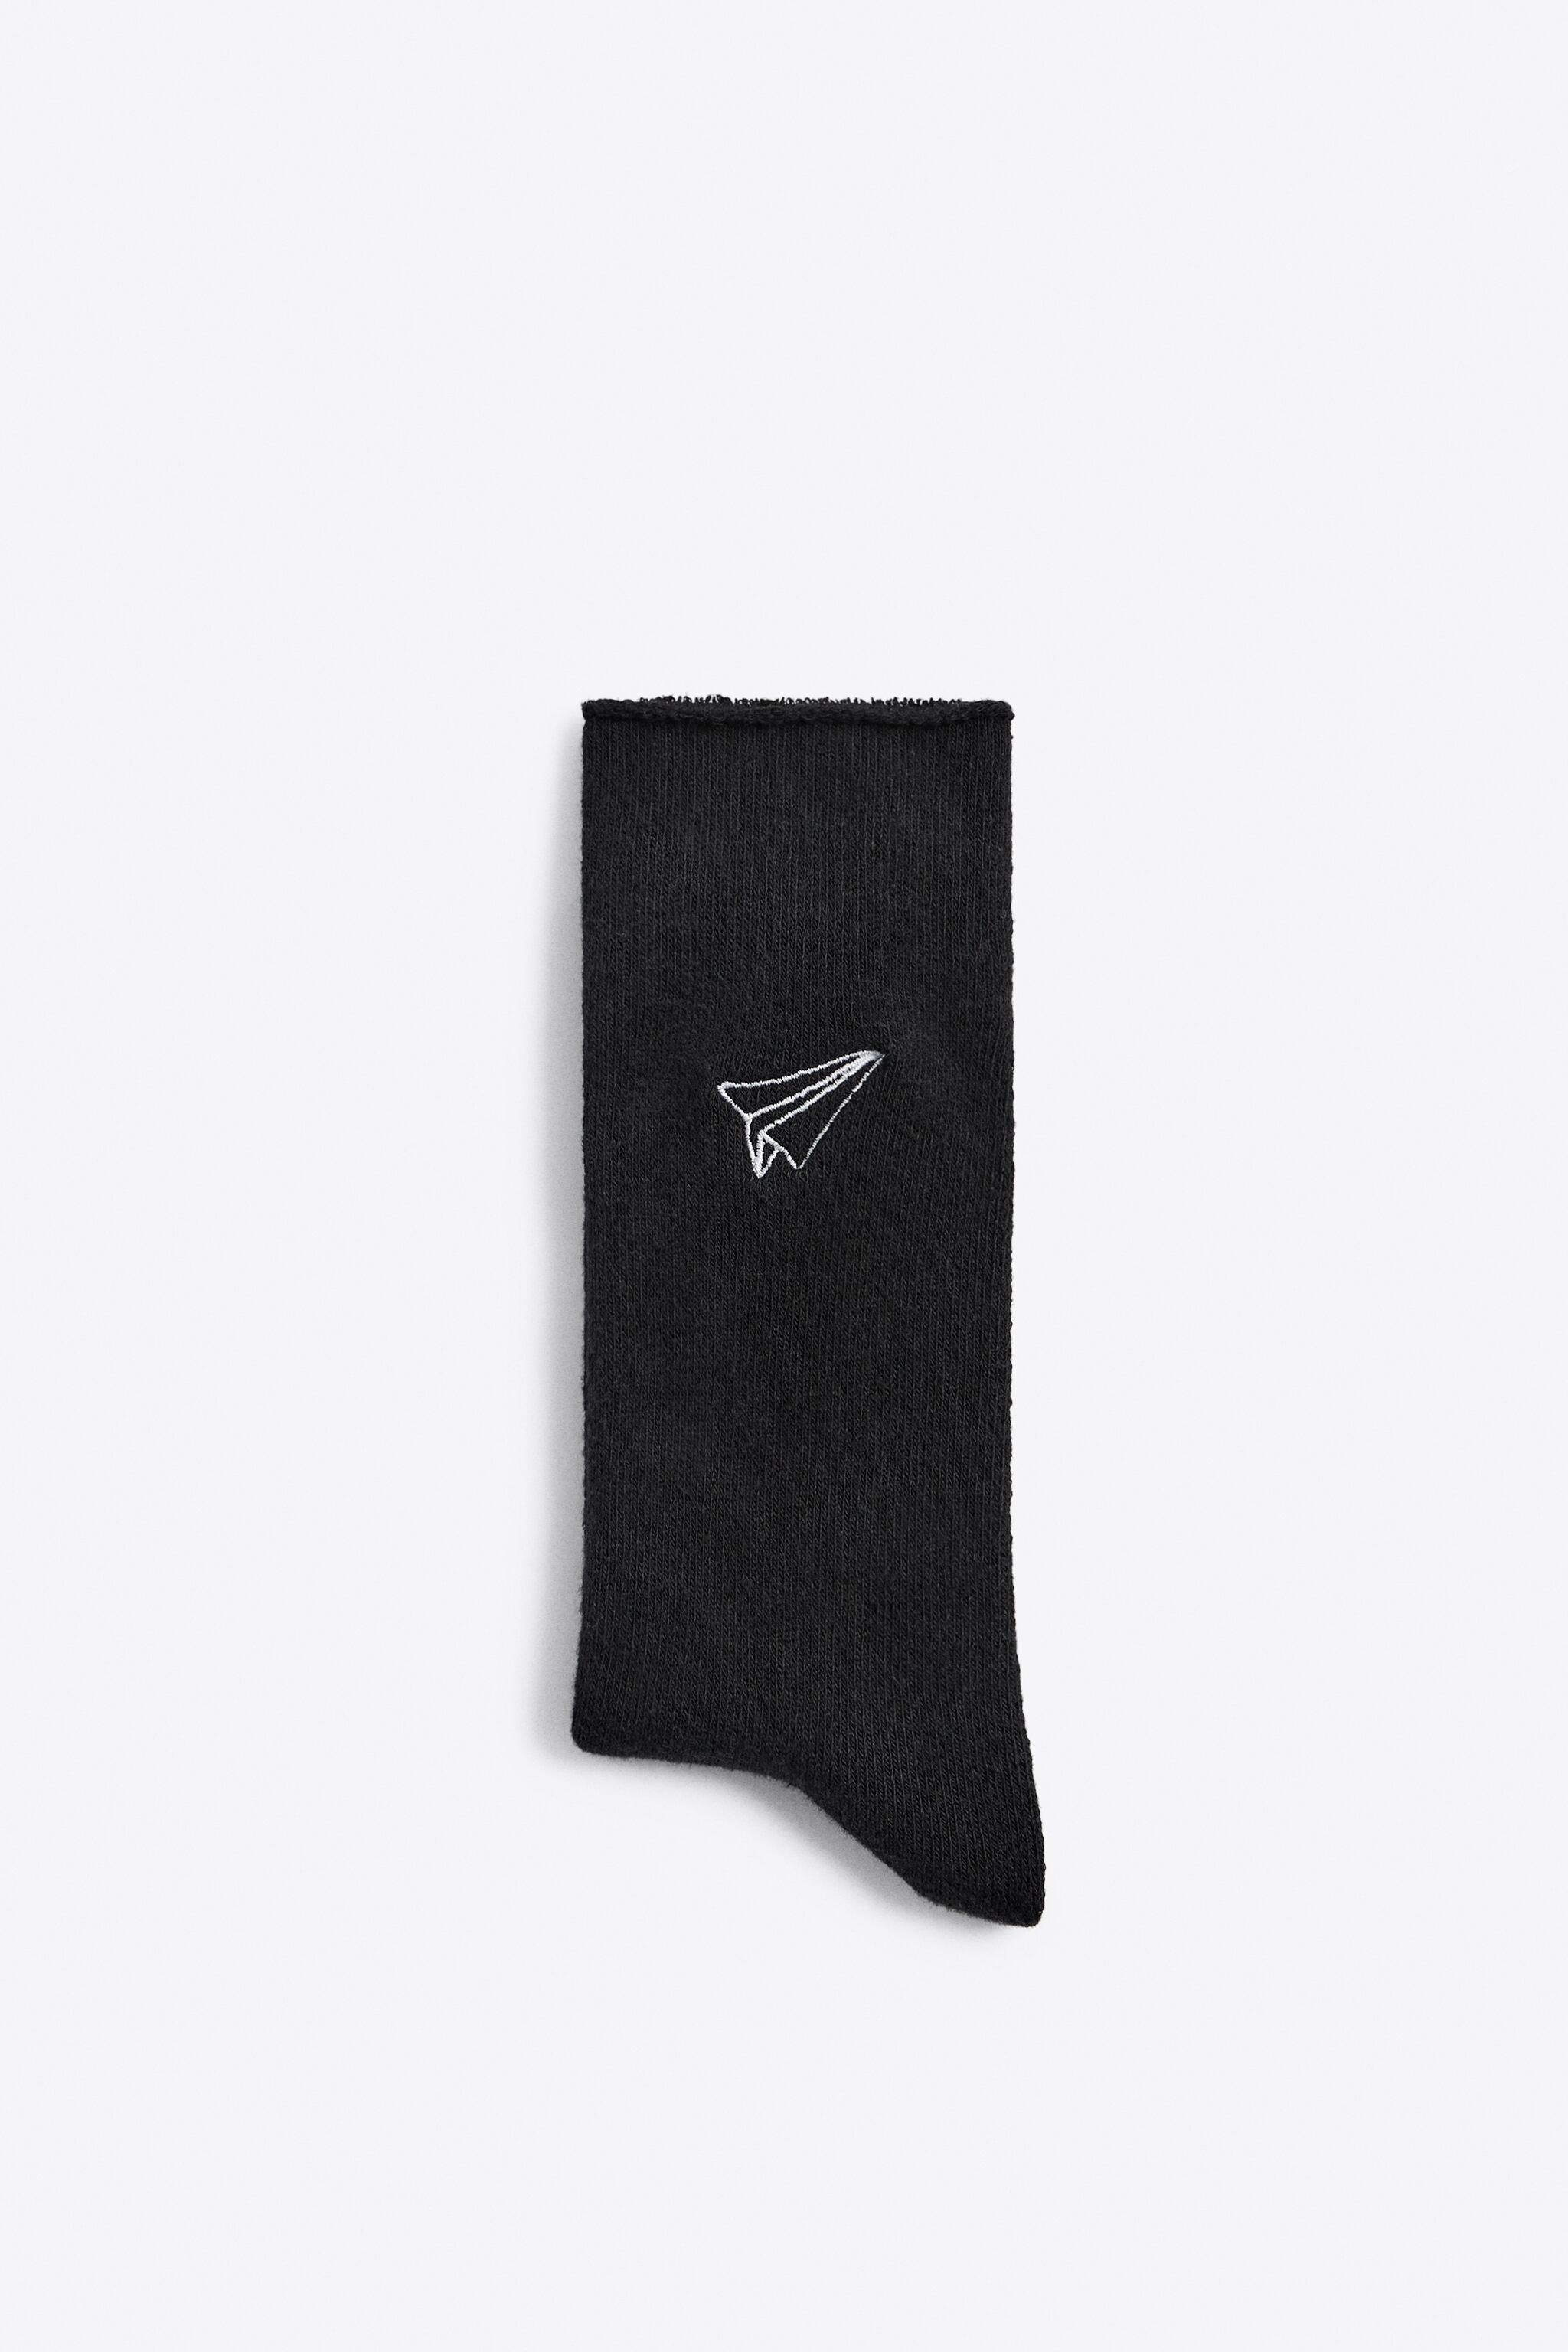 EMBROIDERED CONTRASTING SOCKS